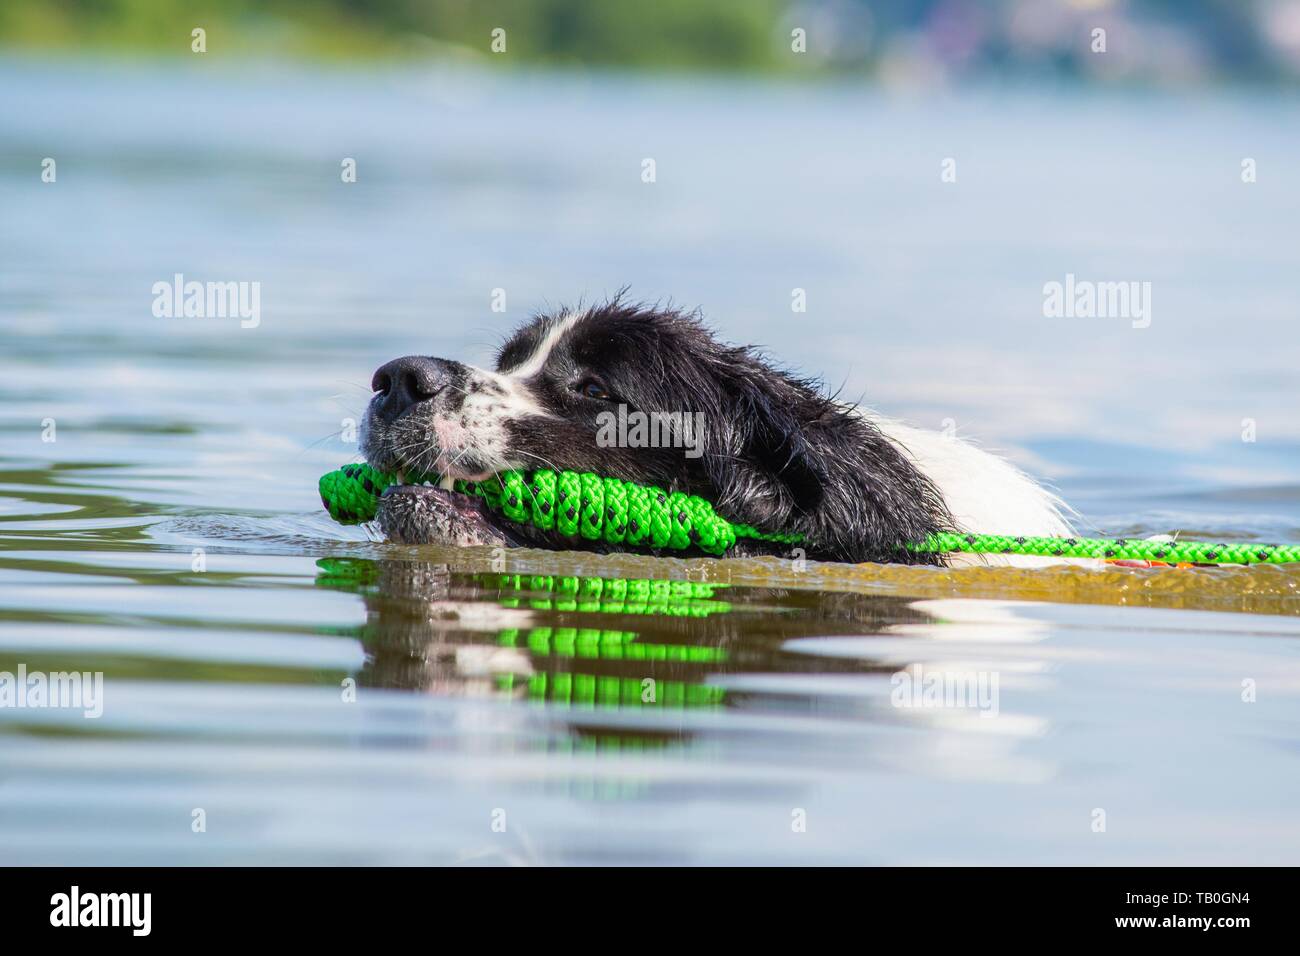 Landseer is trained as a water rescue dog Stock Photo